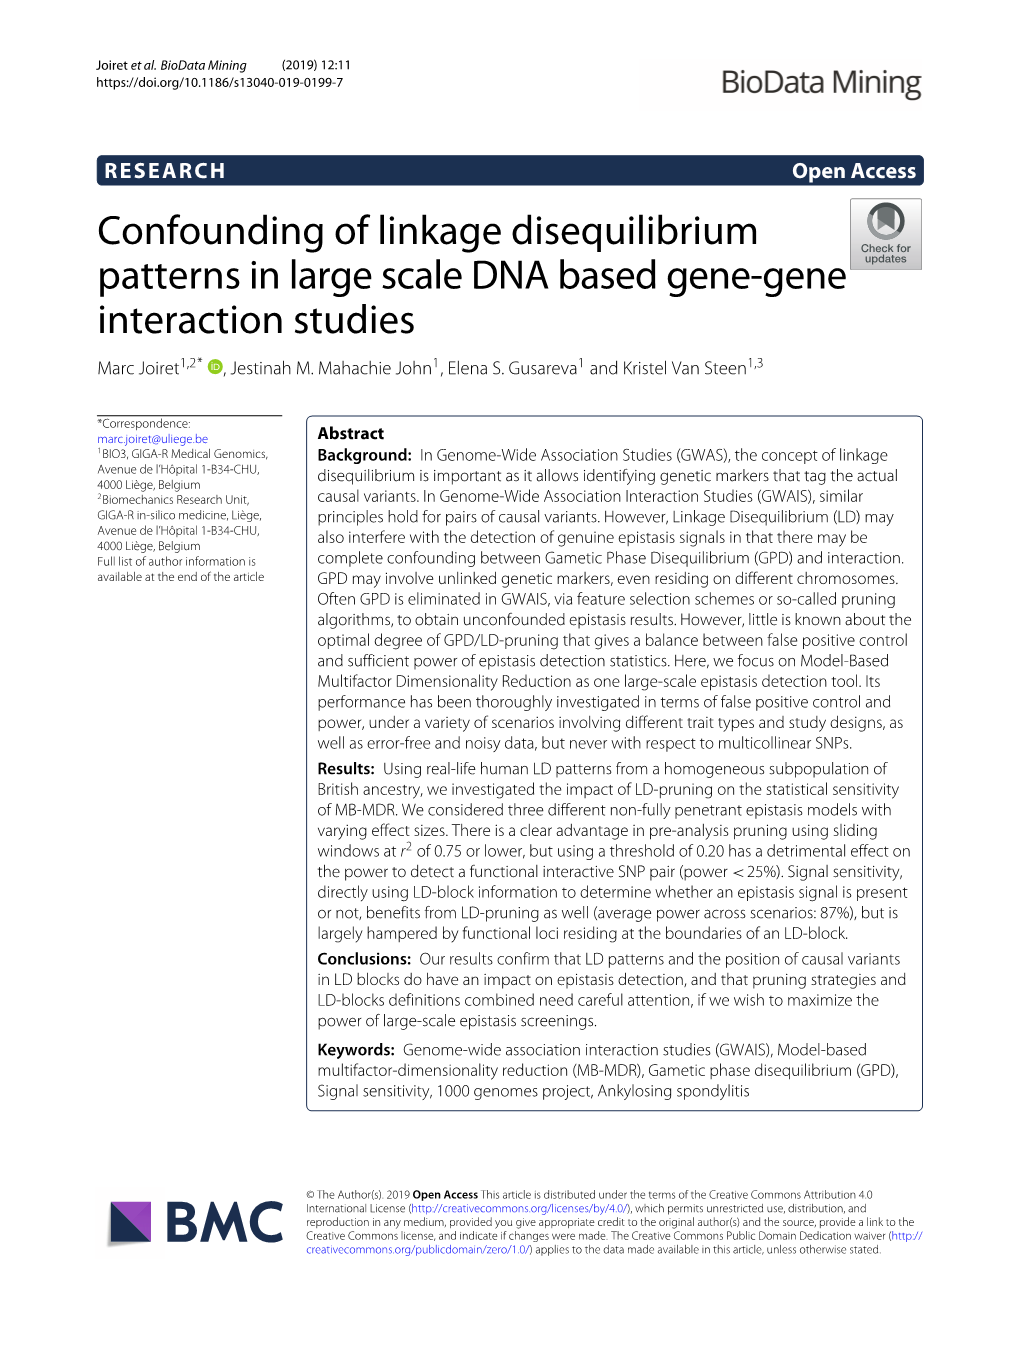 Confounding of Linkage Disequilibrium Patterns in Large Scale DNA Based Gene-Gene Interaction Studies Marc Joiret1,2* , Jestinah M